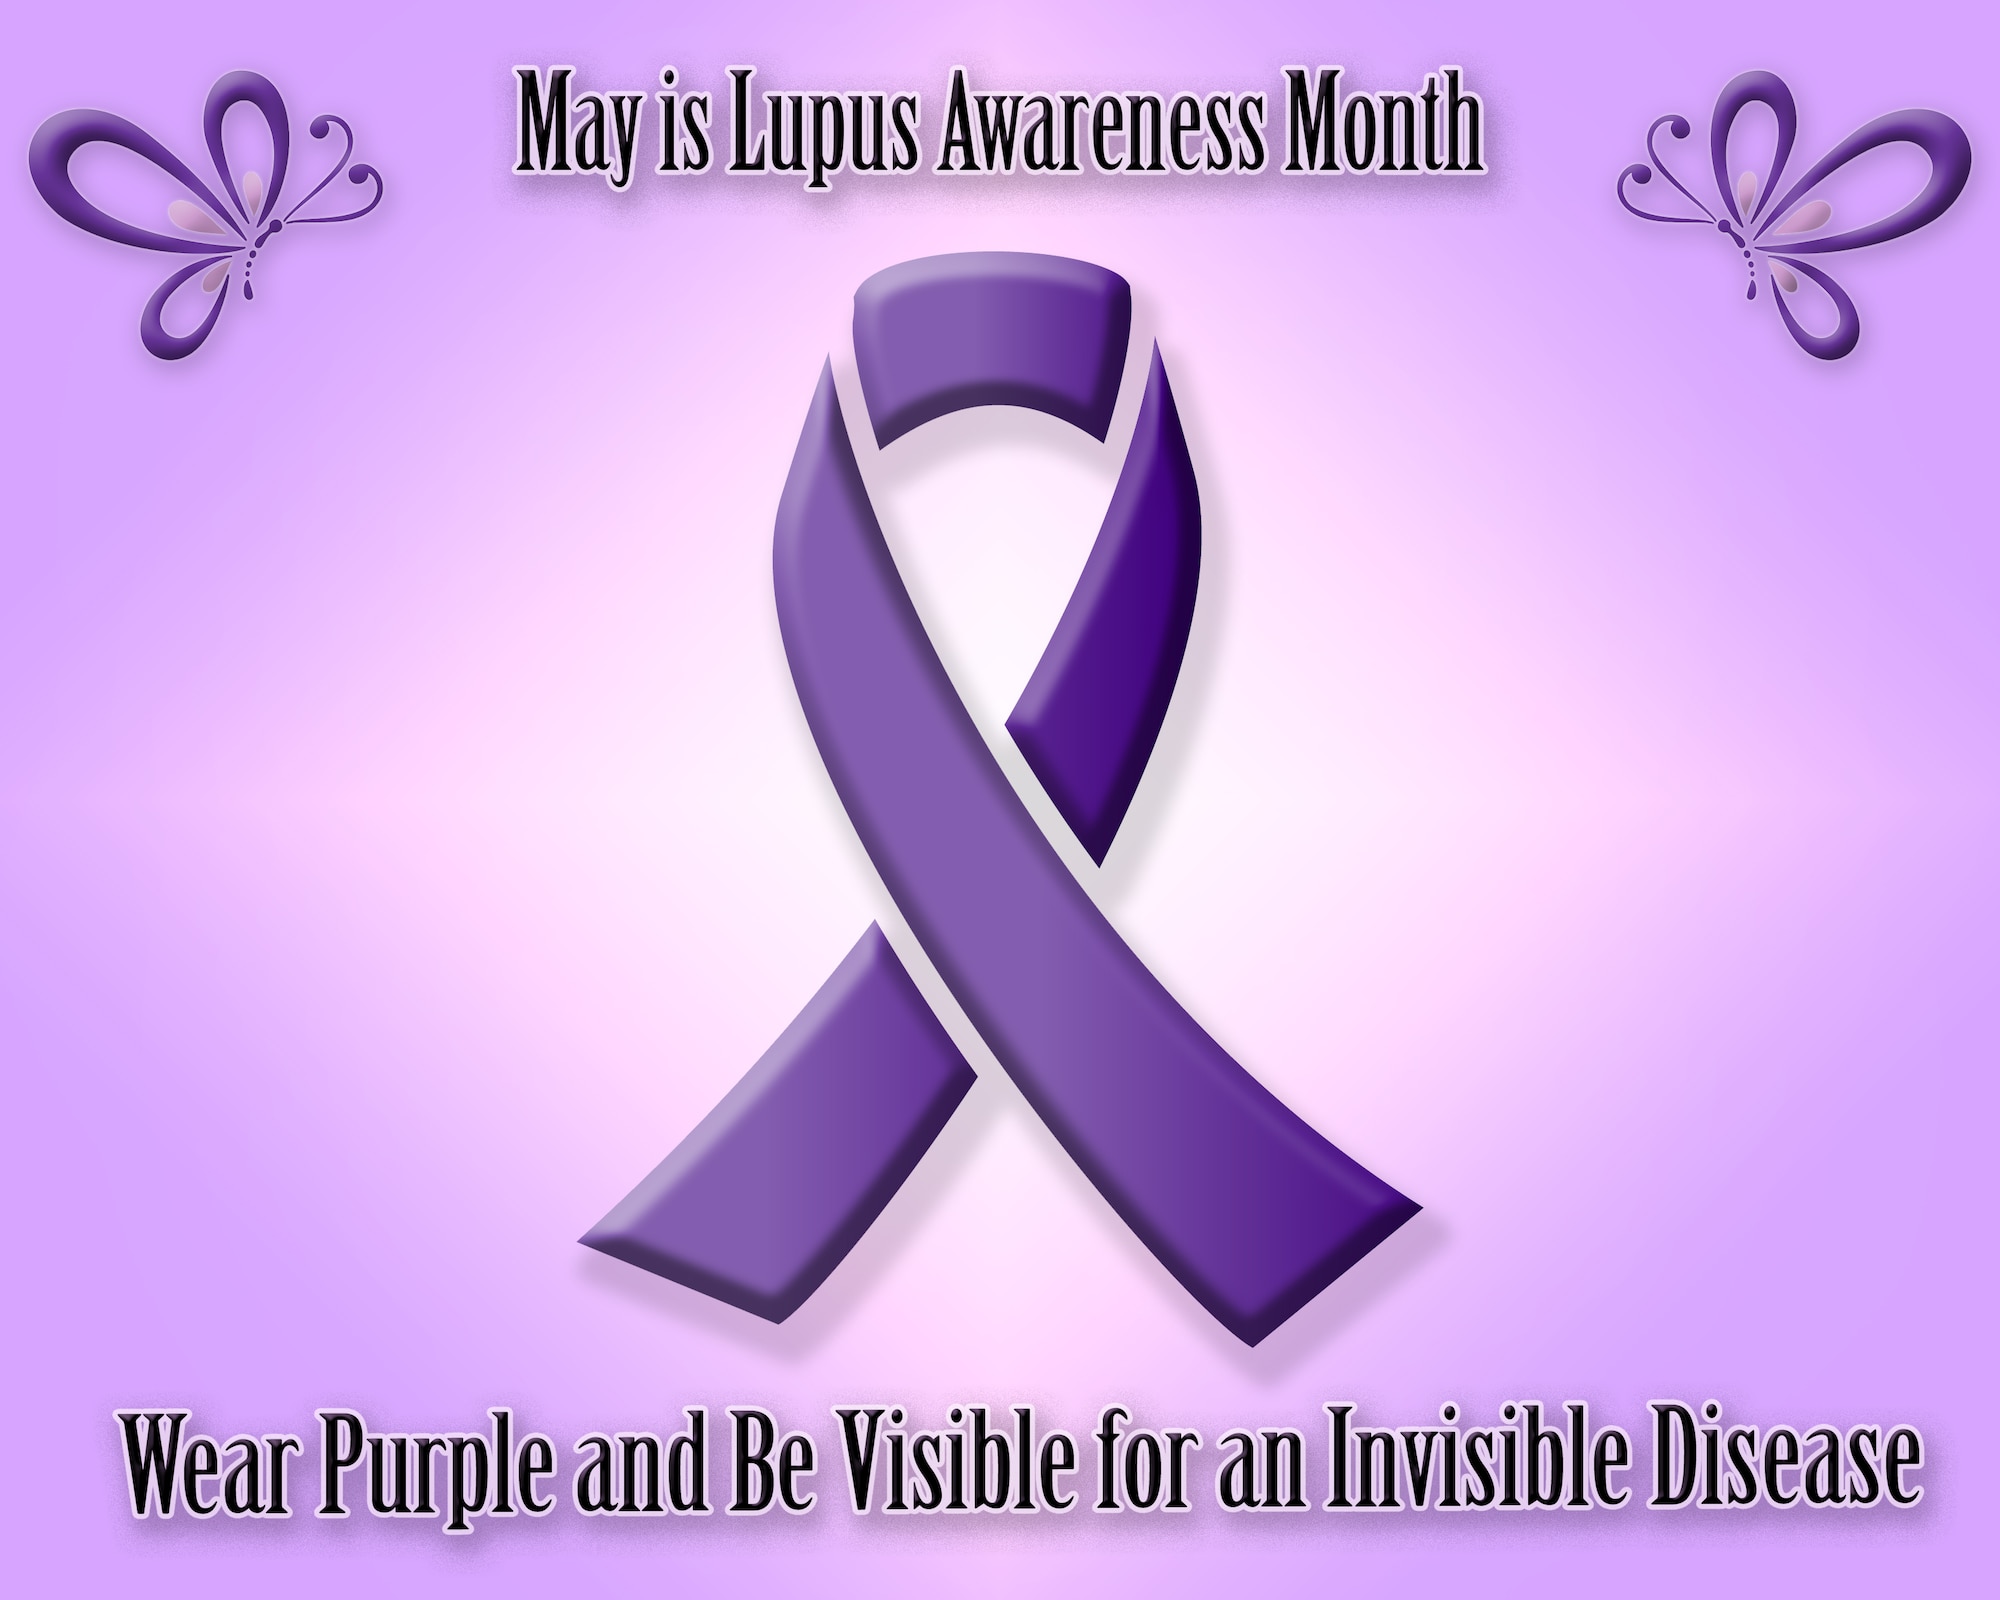 May is Lupus Awareness Month. Systemic Lupus Erythematosus, the most common form of lupus, is a chronic autoimmune disease that can cause severe fatigue and joint pain. Anyone can develop lupus, but it most often affects women. Lupus is also more common among African American, Hispanic, Asian, and Native American women. (U.S. Air Force illustration by Staff Sgt. Olivia Dominique)